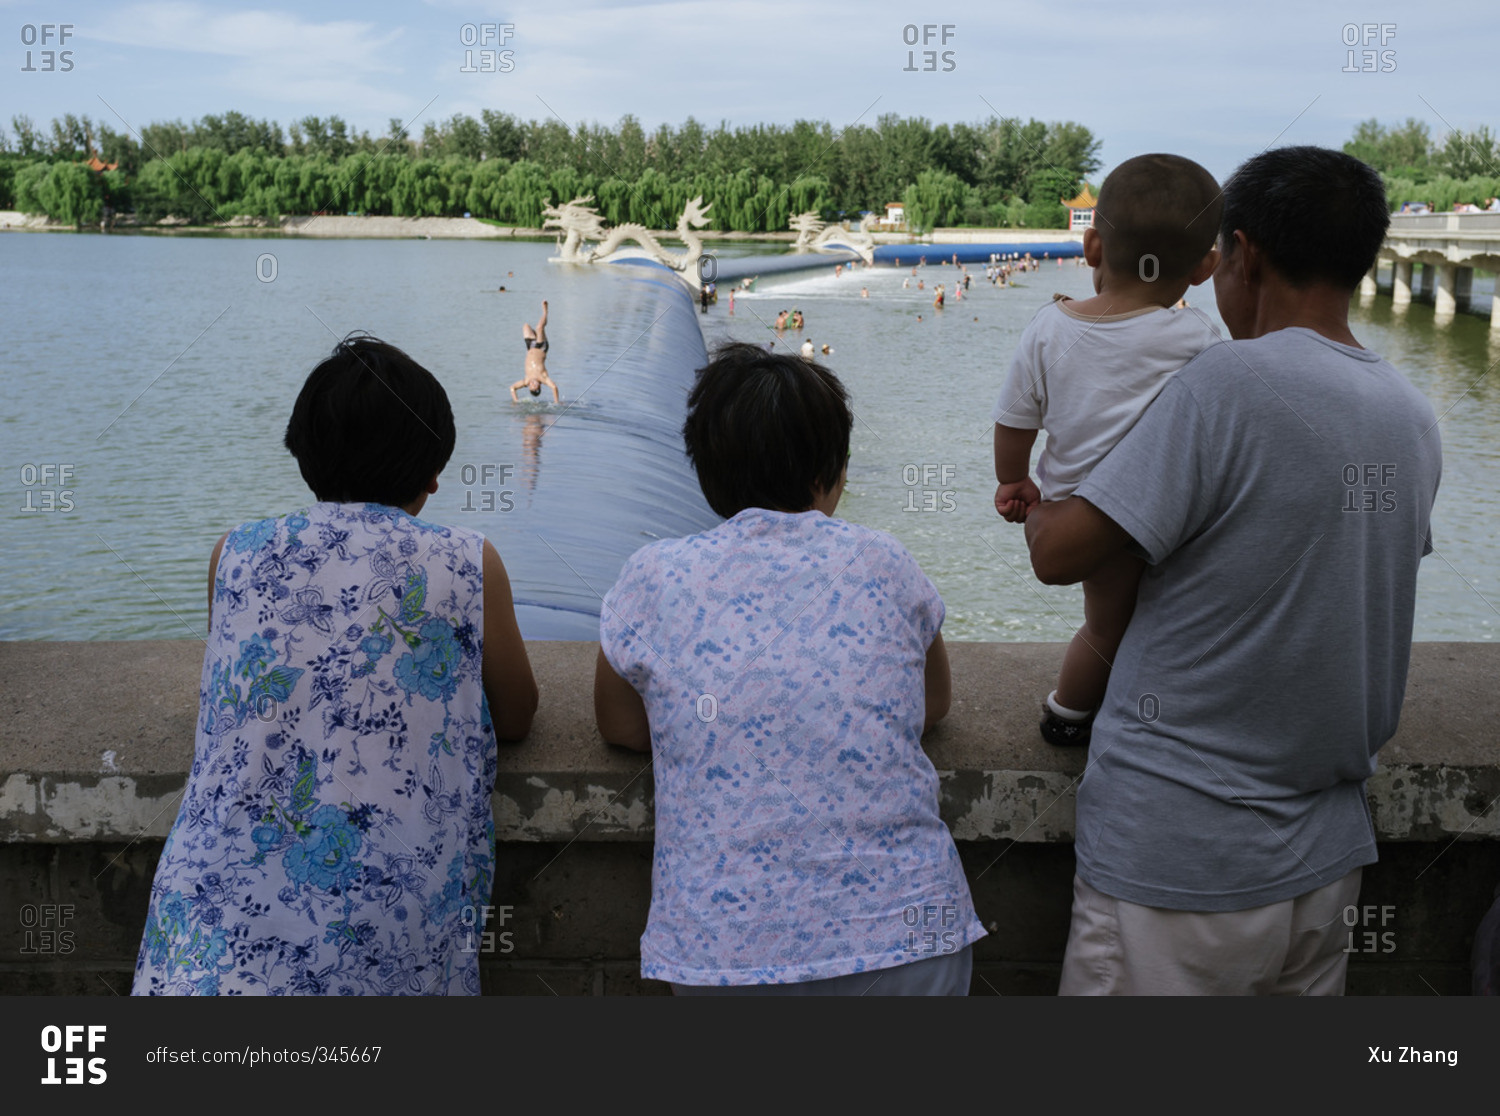 People looking at a river where people are swimming